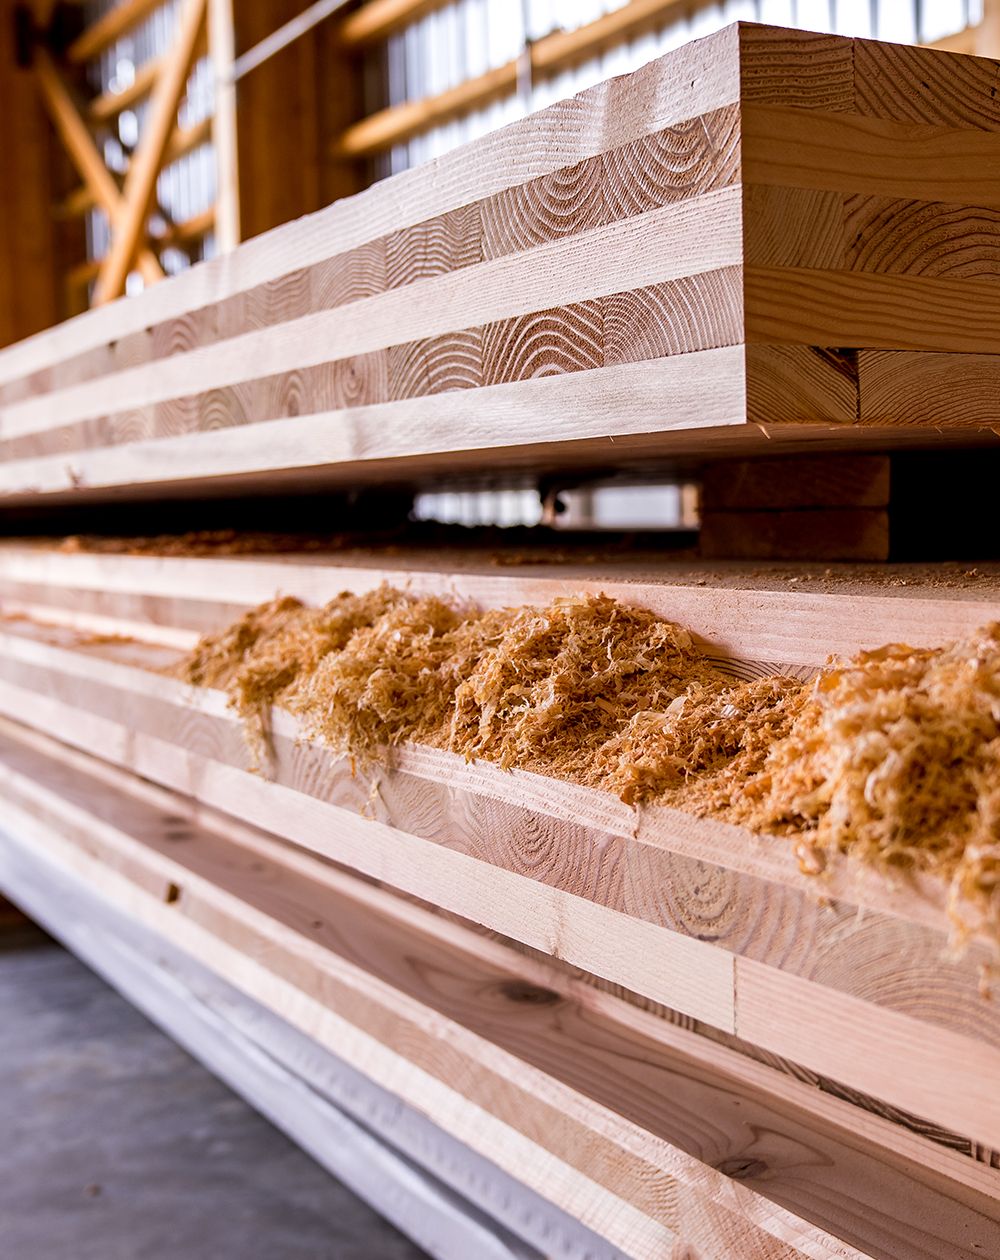 Cross-laminated timber and other mass timber manufacturing and construction is the focus of the International Mass Timber Conference